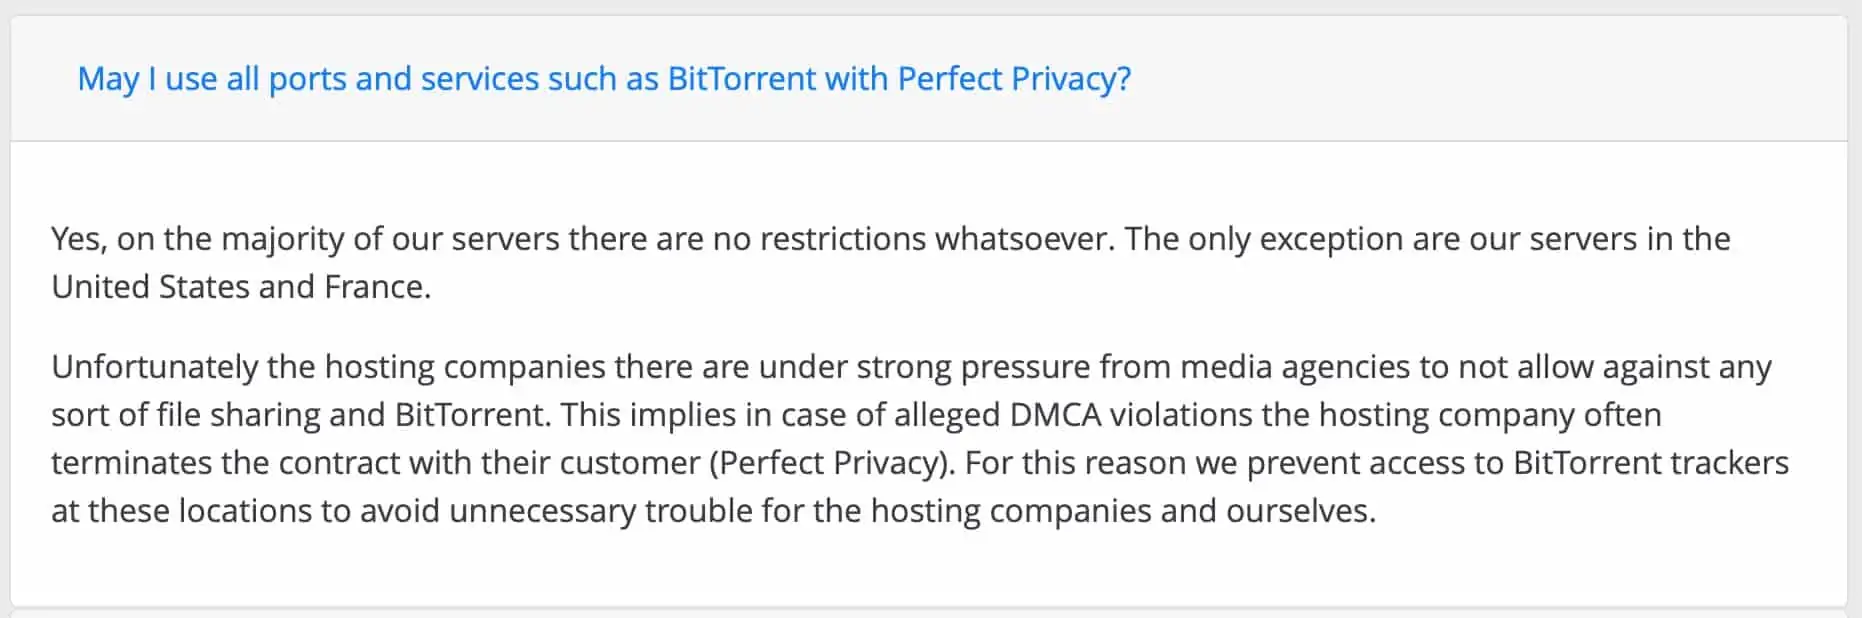 PerfectPrivacy - Torrenting